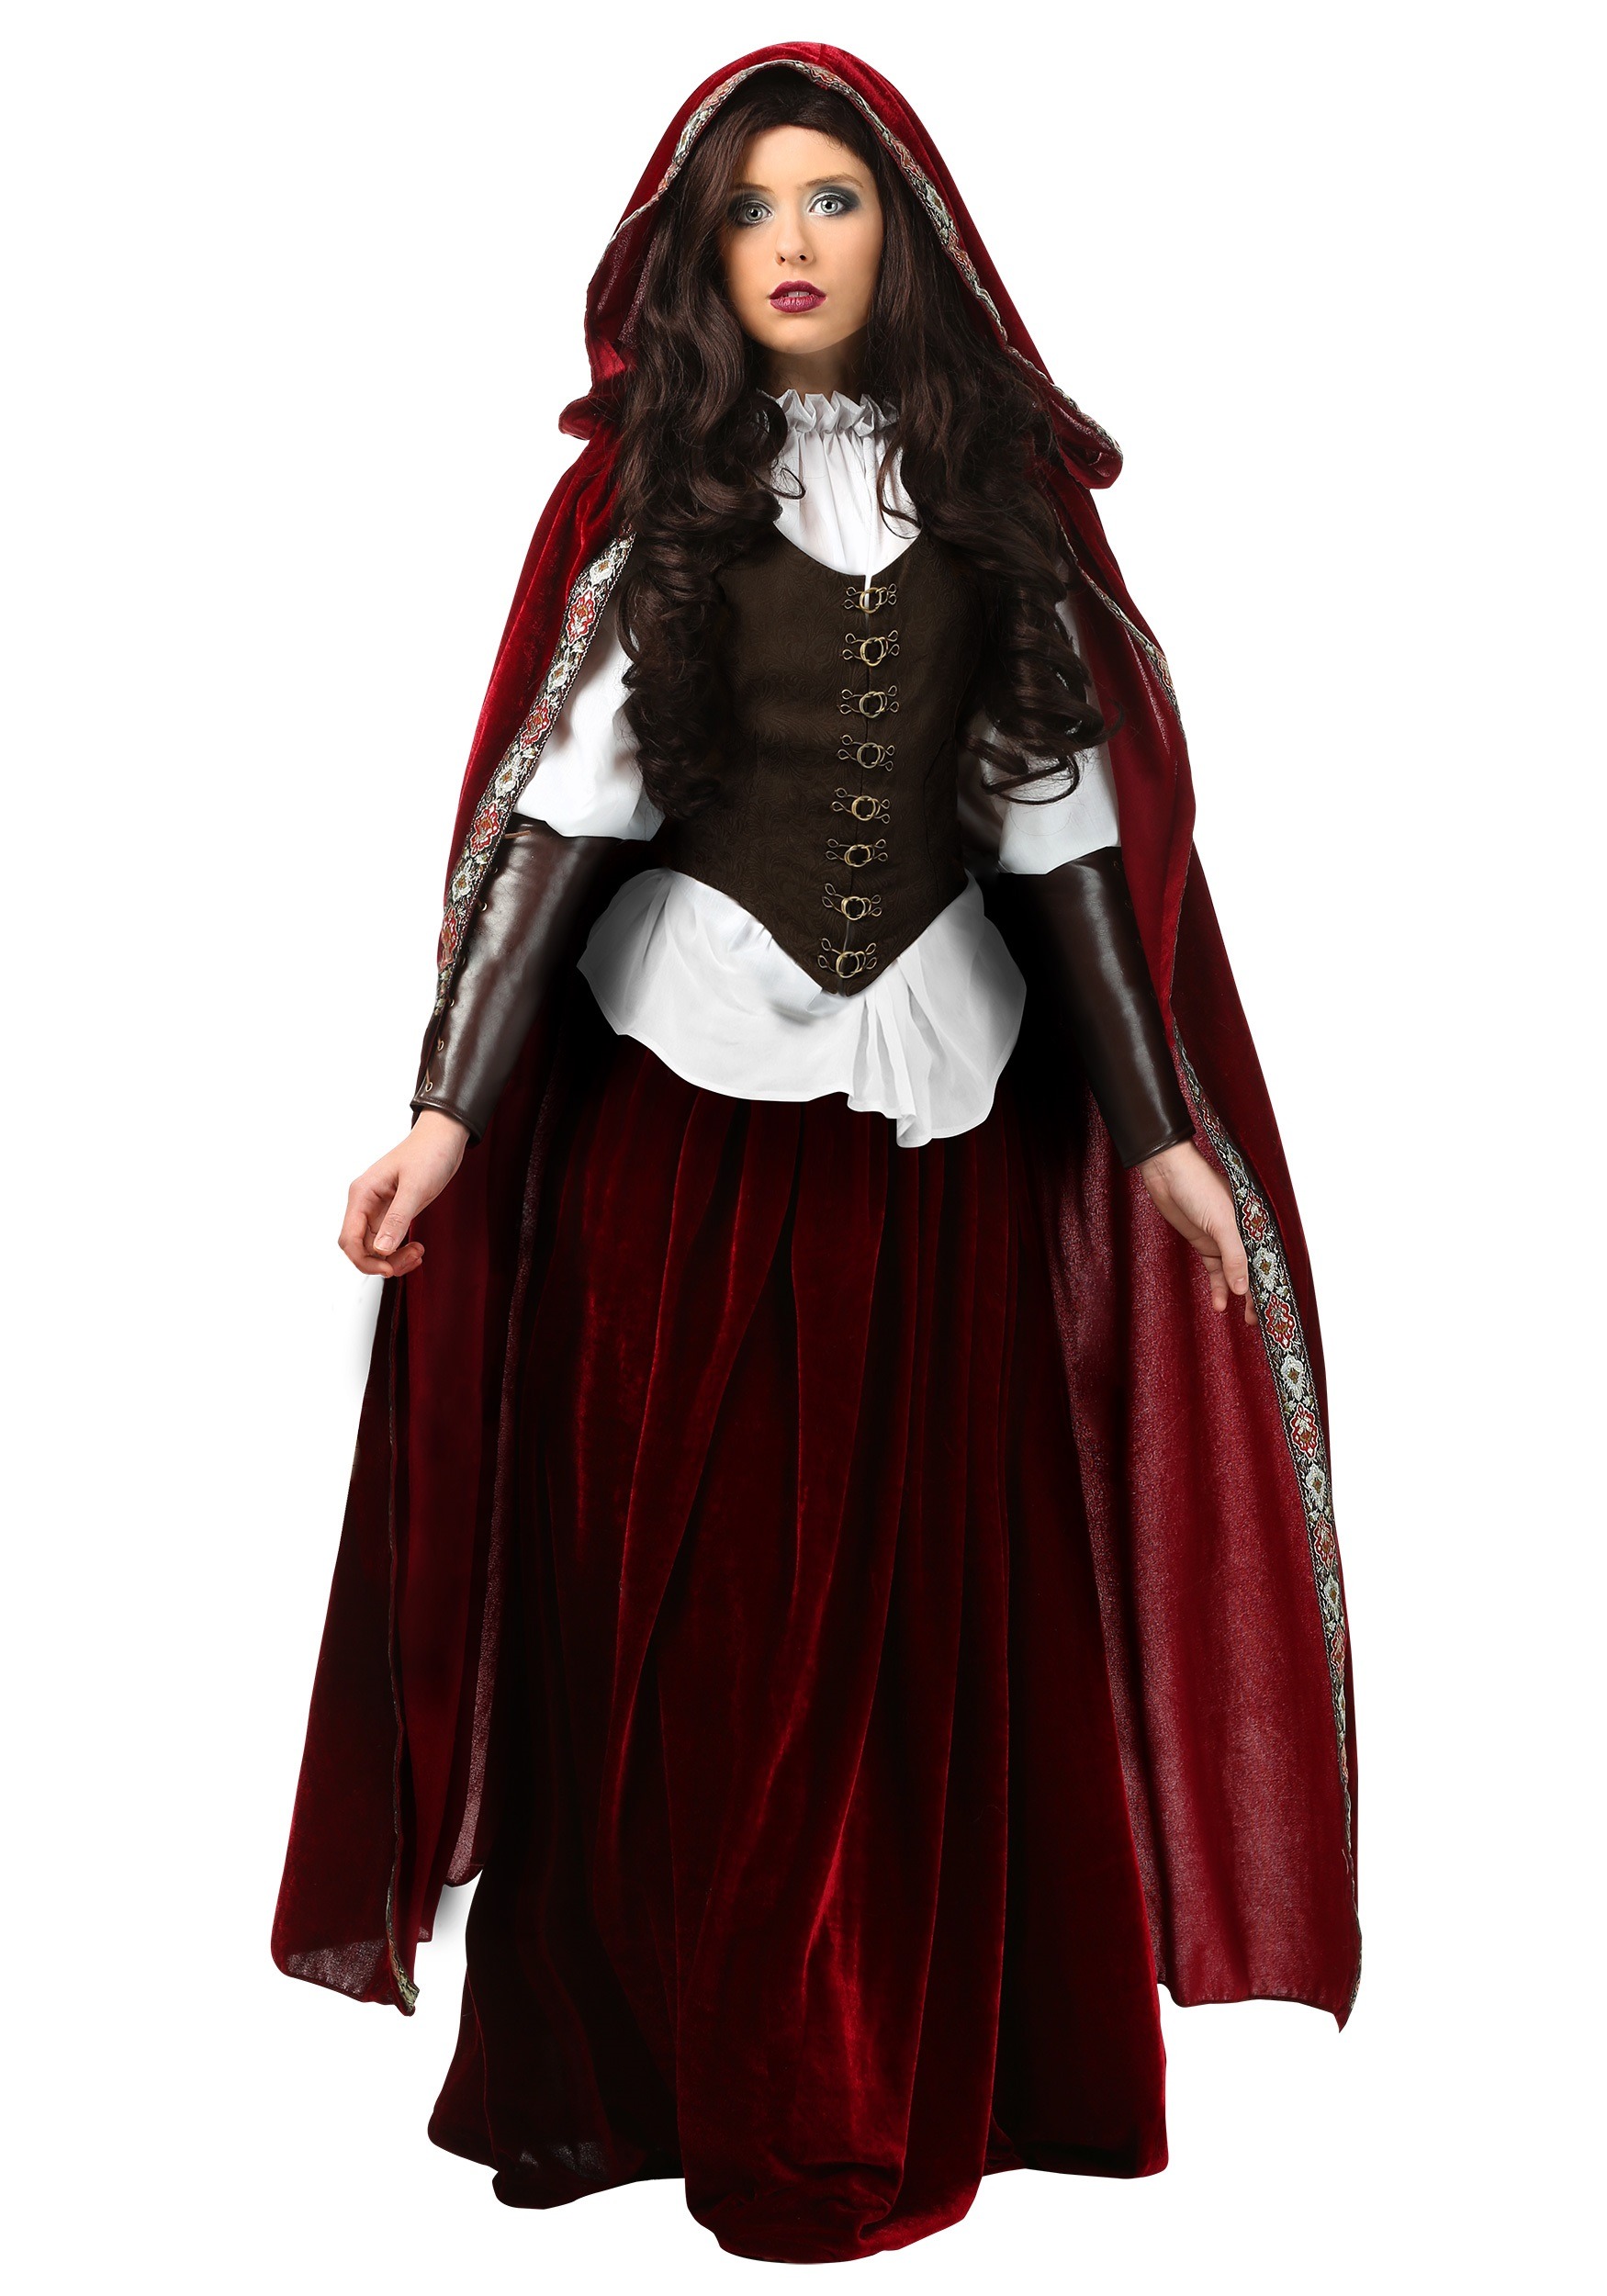 Photos - Fancy Dress Deluxe FUN Costumes  Red Riding Hood Plus Size Costume for Women | Exclusiv 